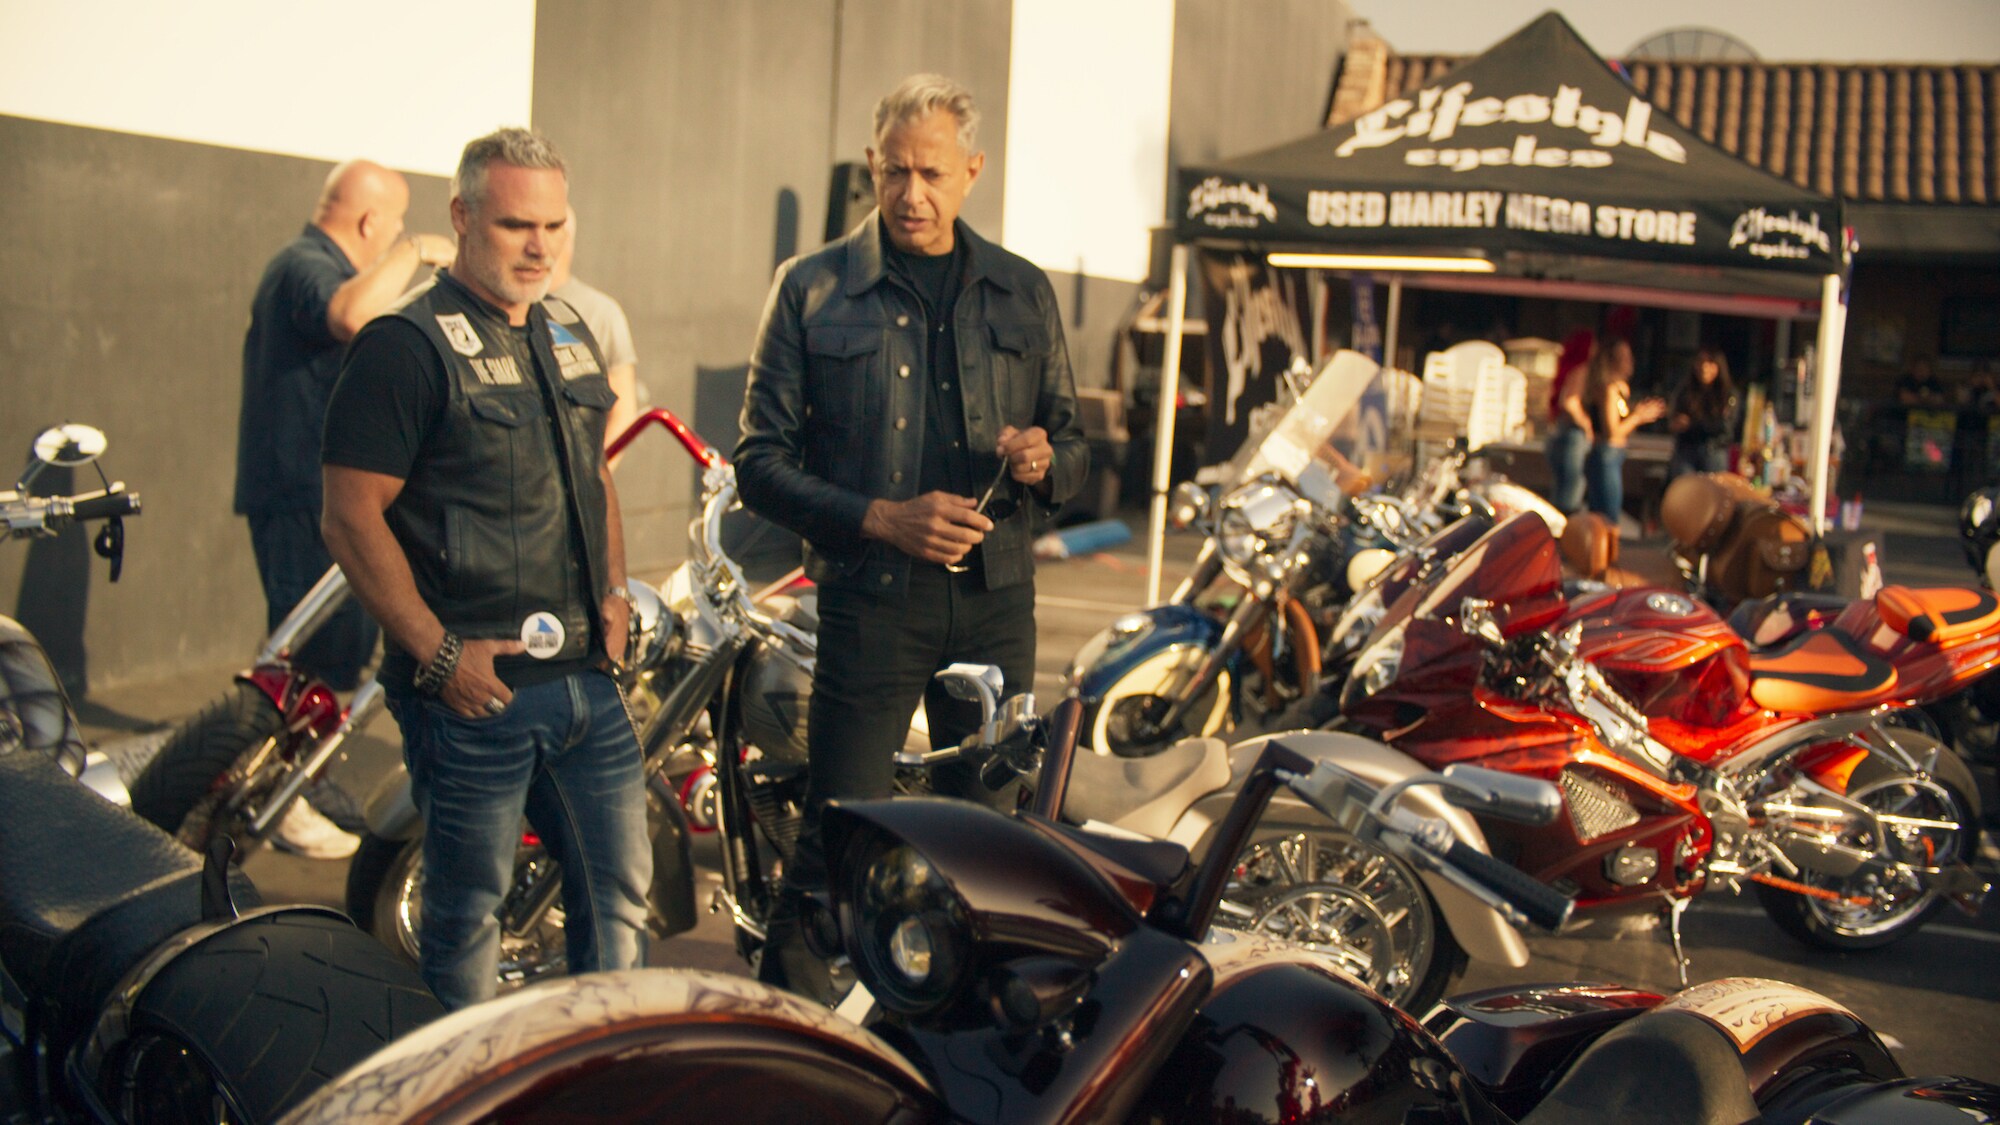 Huntington, CA - Jeff Goldblum (R) talks with a motorcycle enthusiast. (Credit: National Geographic)